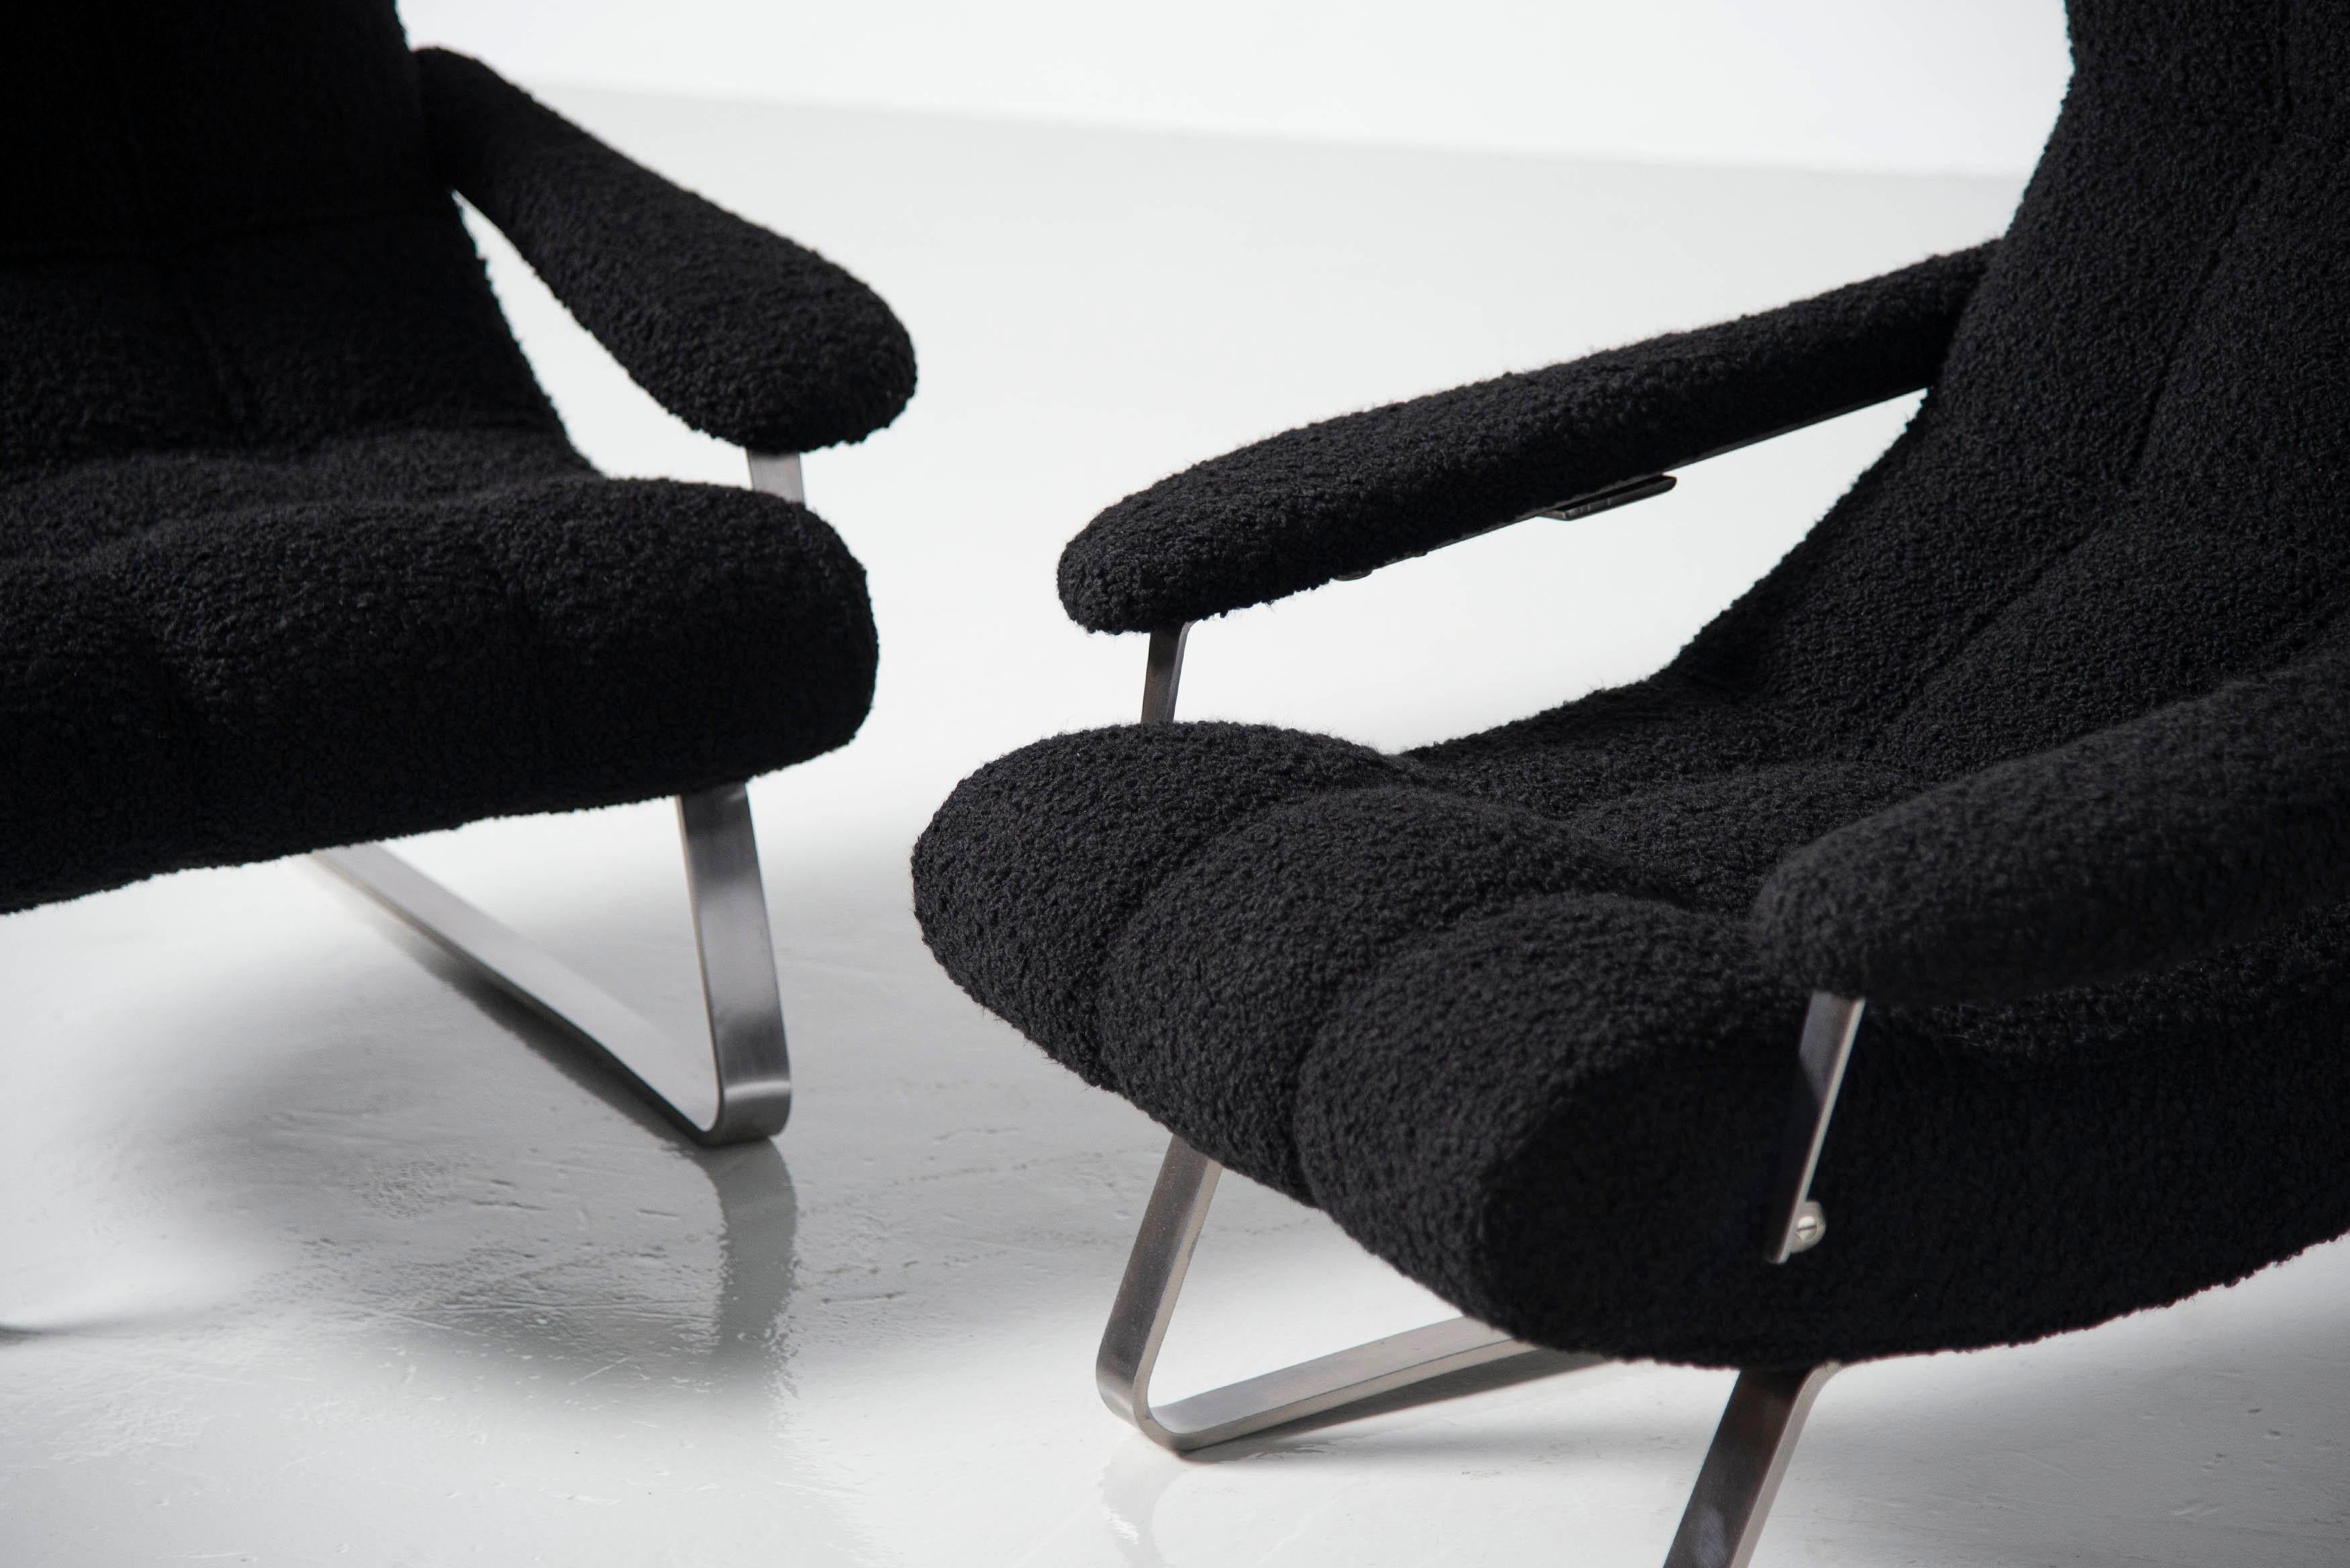 Large pair of lounge chairs designed by Guido Bonzano and manufactured by Tecnosalotto, Italy 1970. These chairs have spring steel feet which bring extra comfort when seating on them. They are upholstered in a beautiful black bouclé fabric and look